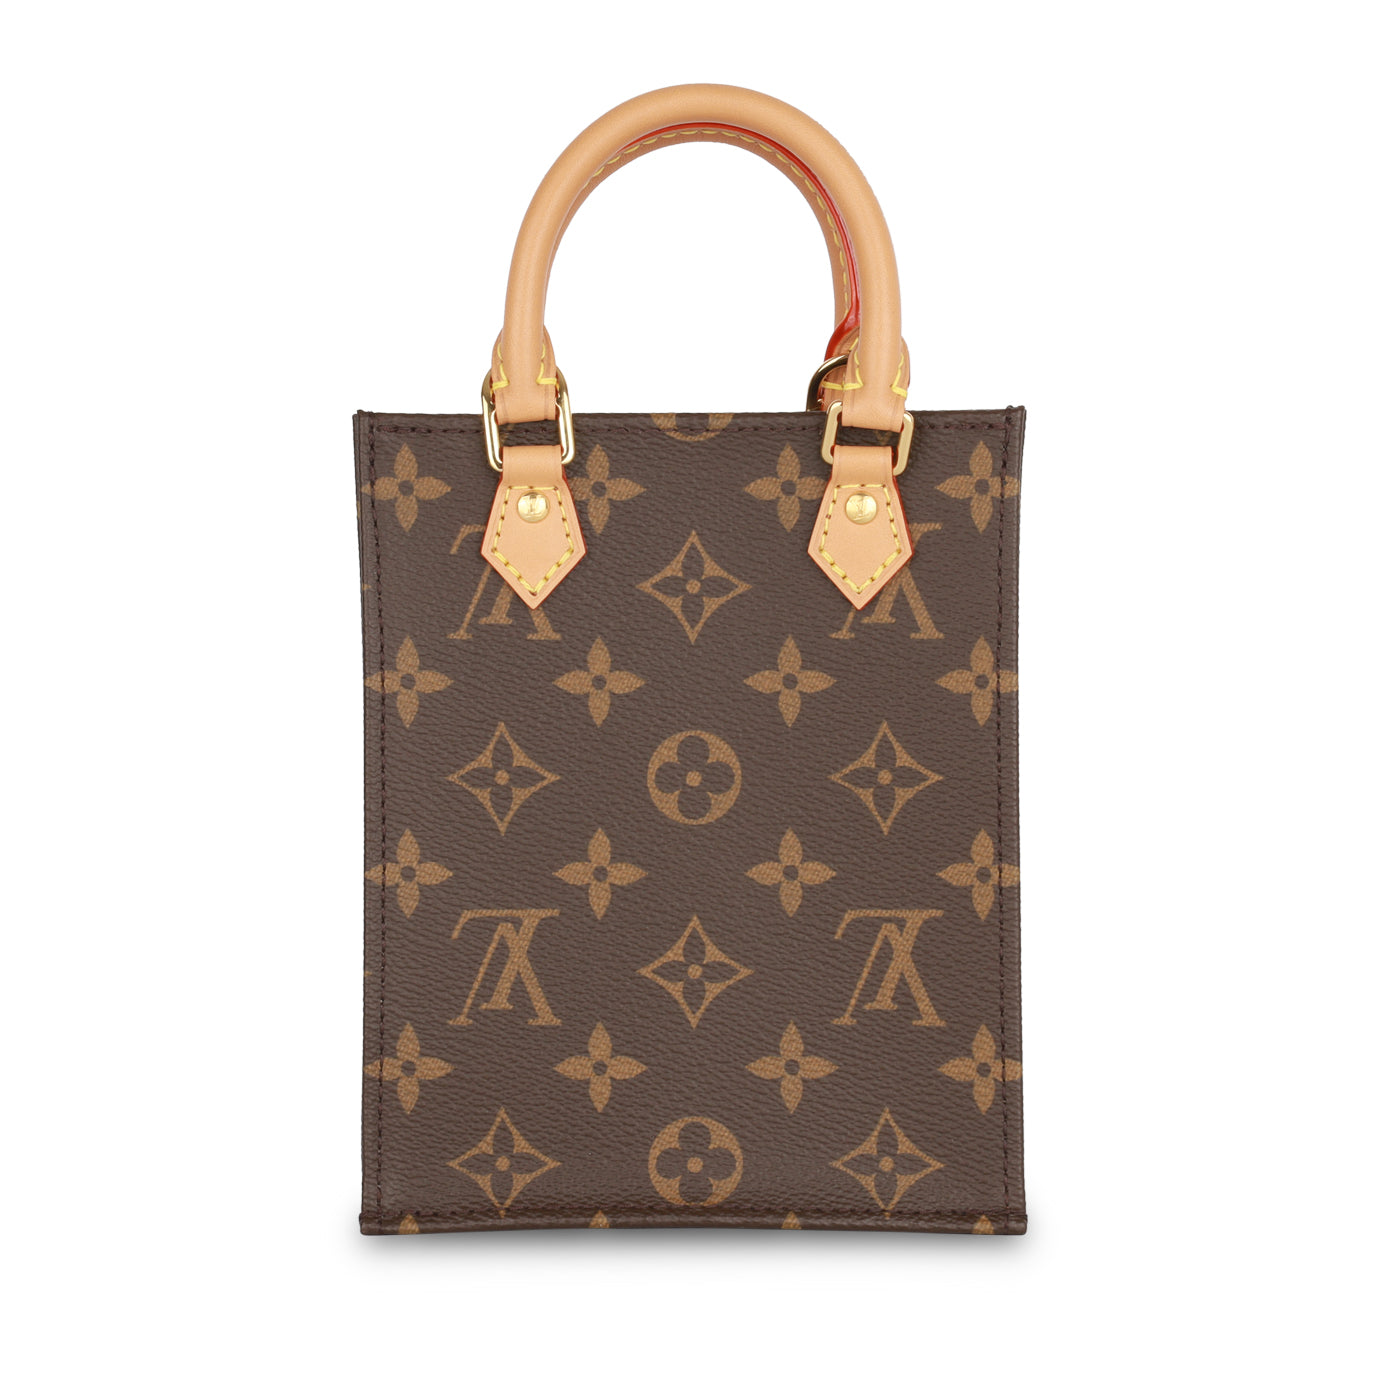 Louis Vuitton Monogram Fabric and Python Embossed Leather Low Top